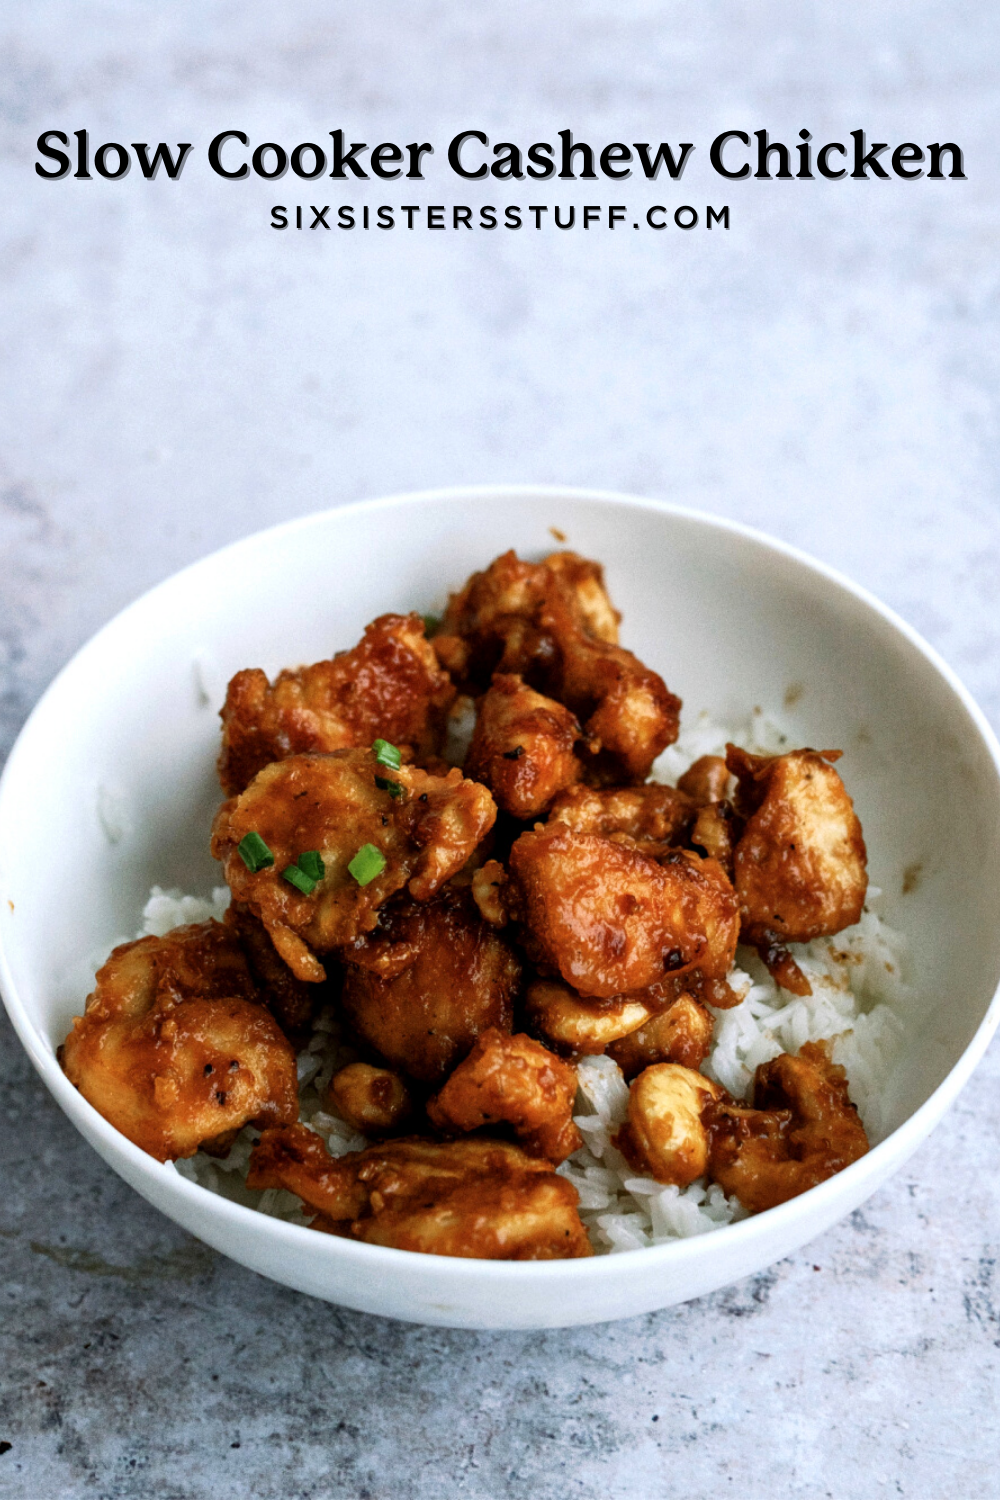 Slow Cooker Cashew Chicken in a bowl served over rice